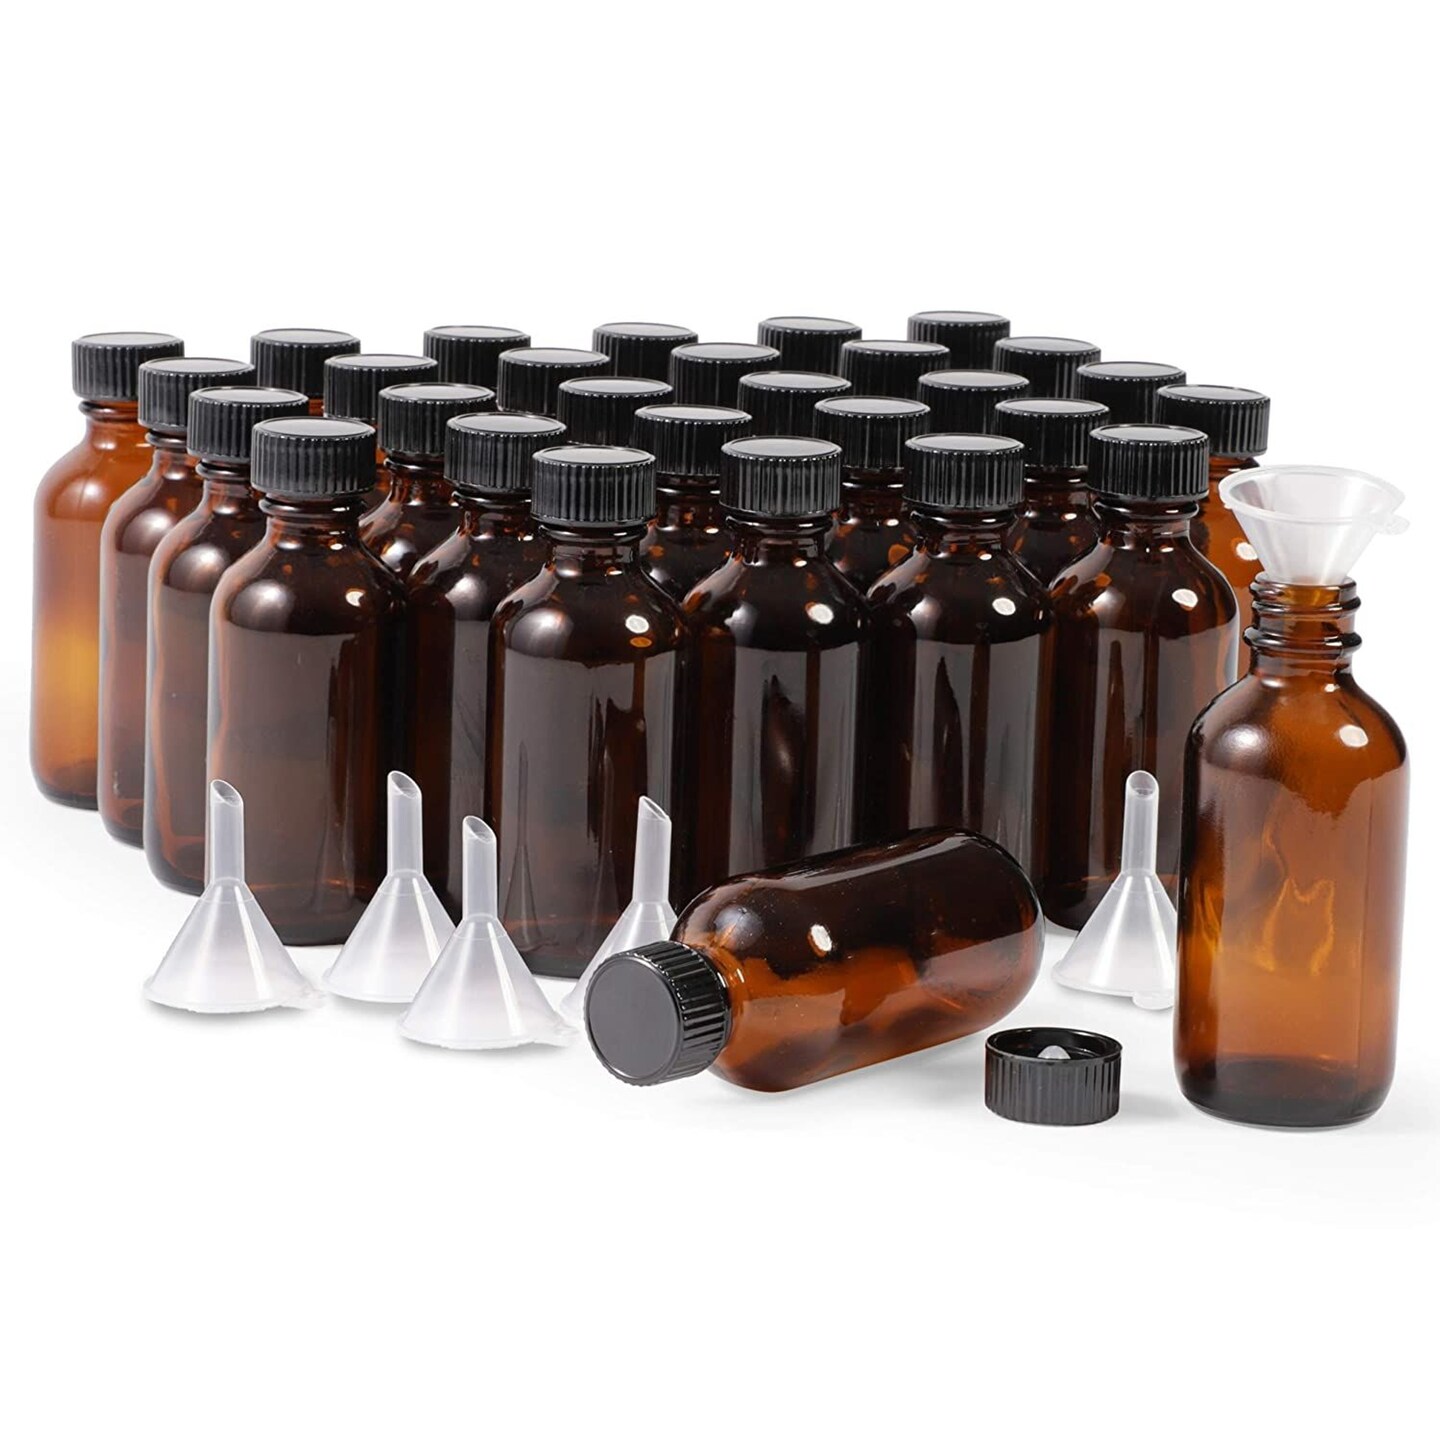 30-Pack 2 oz Amber Glass Bottles with Black Poly Cone Caps and 6 Funnels - Small Boston Round Bottle for Homemade Vanilla Extract, Essential Oils, Perfumes, Liquids